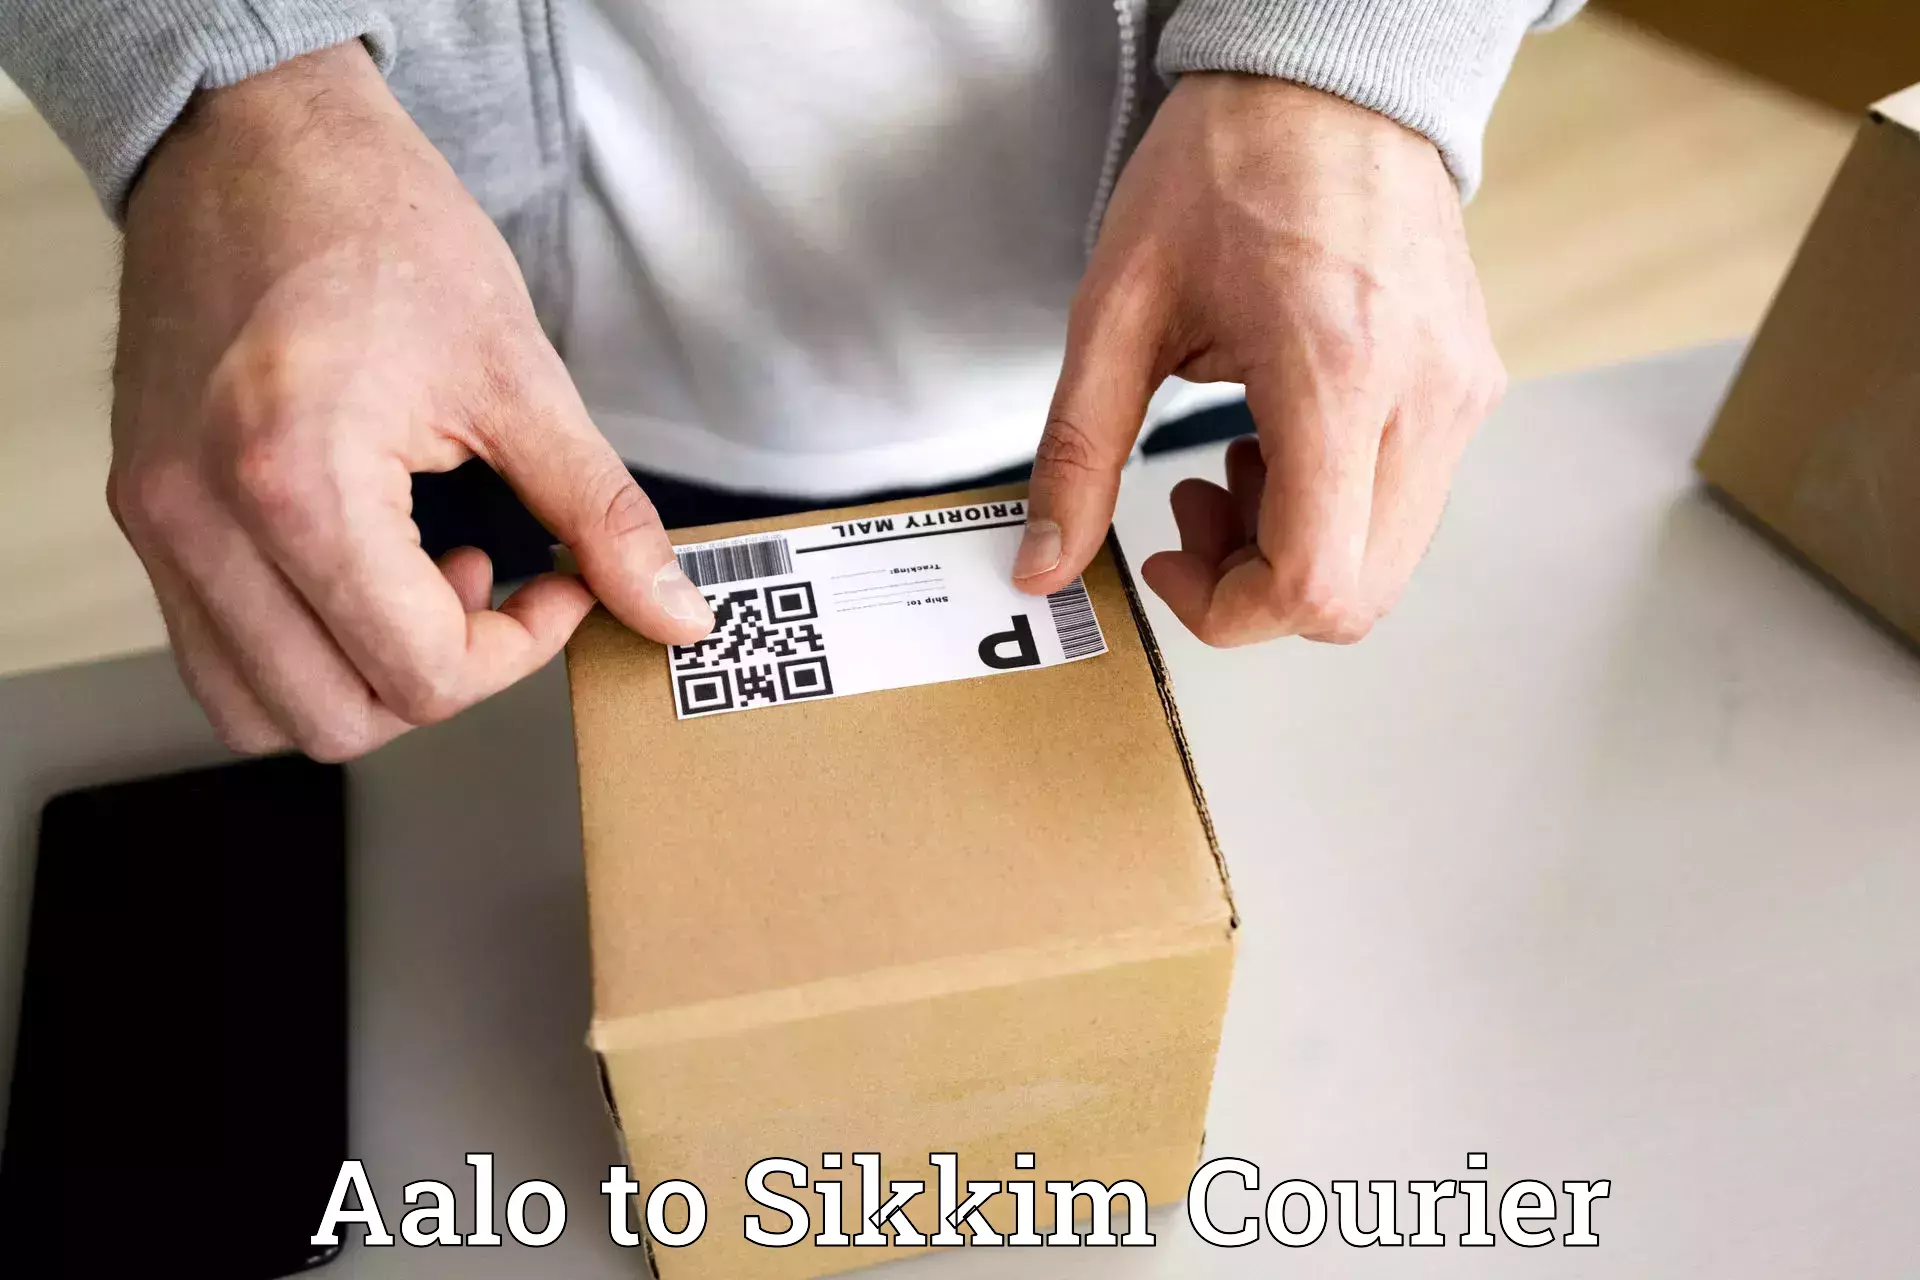 Modern courier technology in Aalo to Pelling